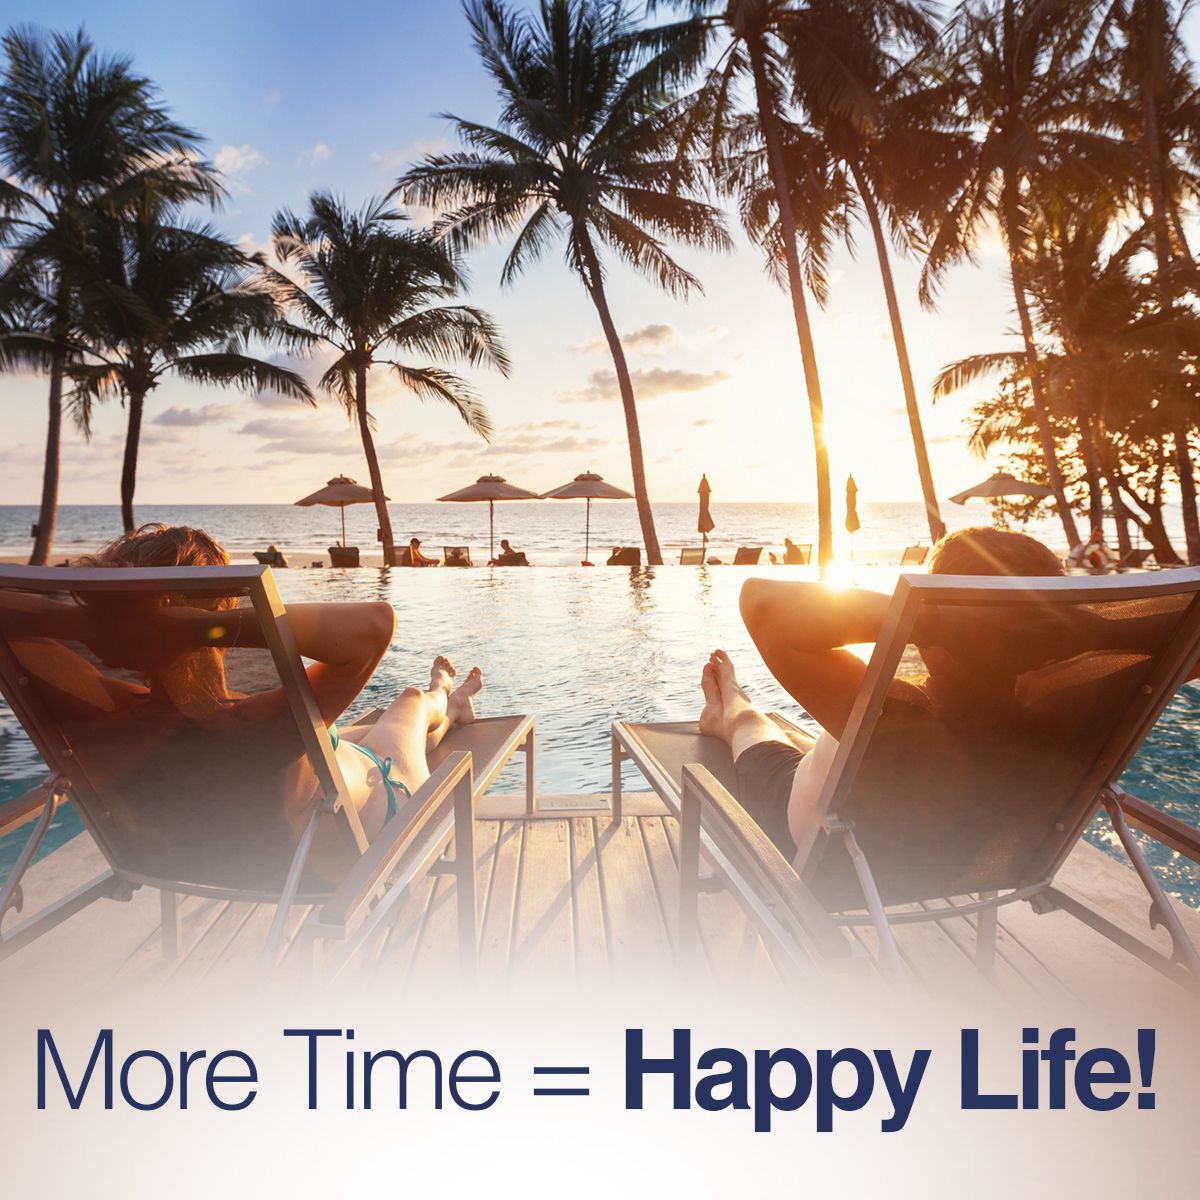 More Time = Happy Life!